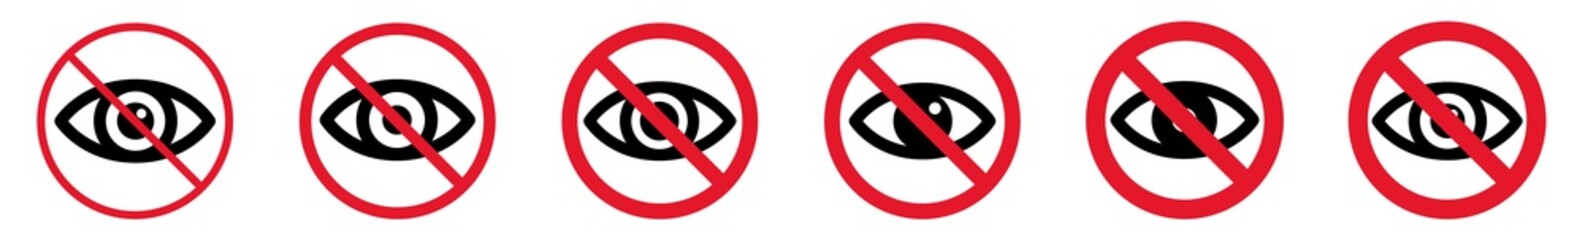 Prohibition Sign Eye Watch Forbidden Icon Set | Eyes See Look Prohibition Signs Sight Prohibited Vector Illustration | Monitoring View Prohibition Sign Isolated